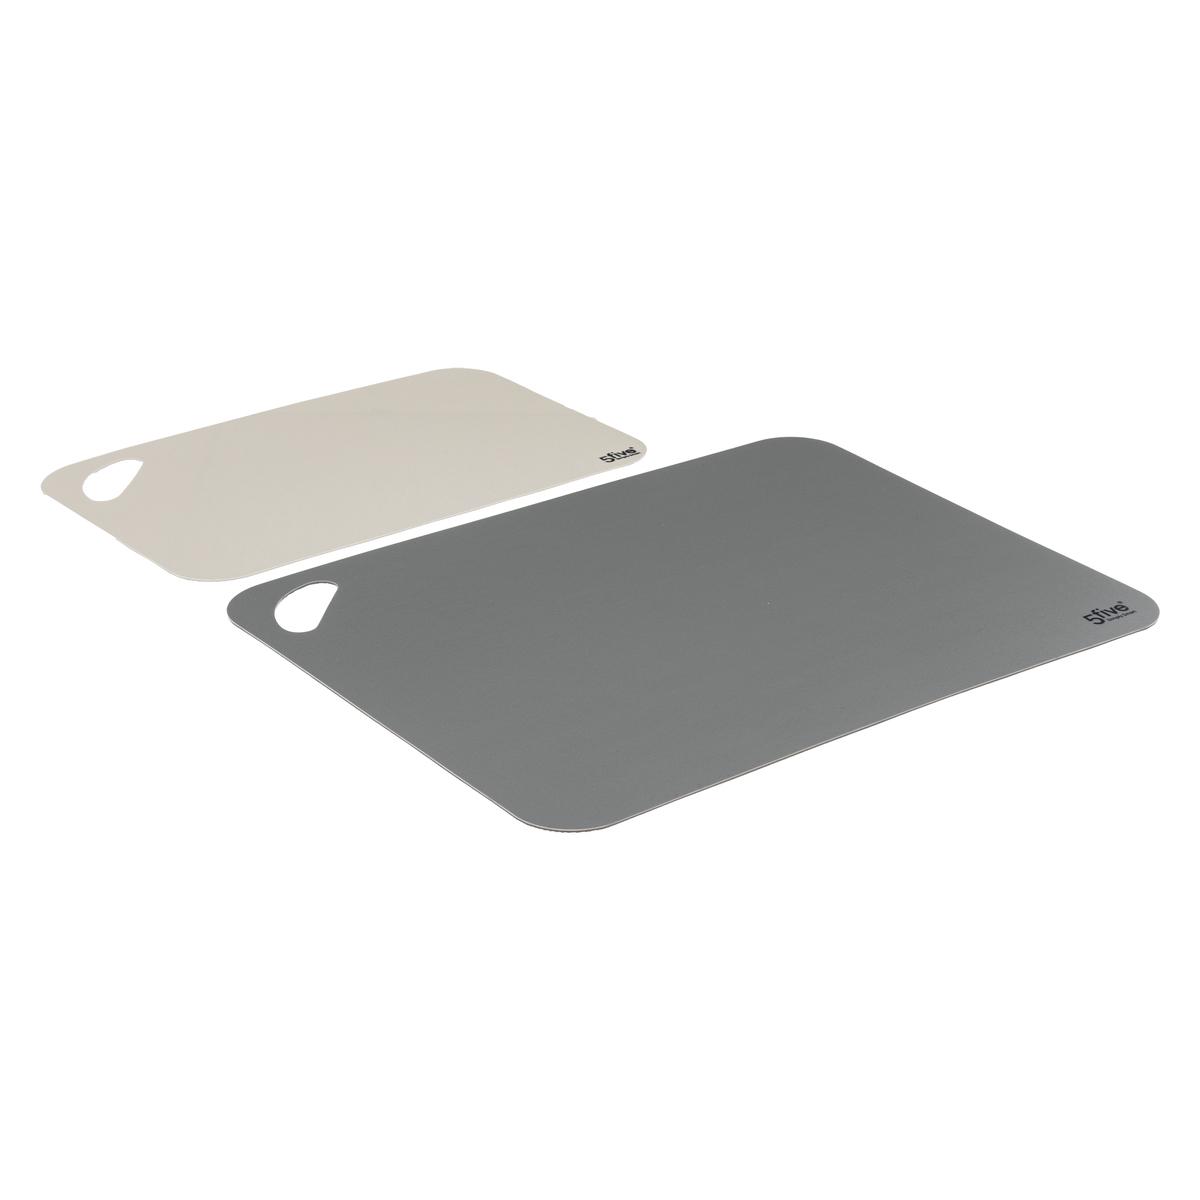 Set of 2 flexible cutting boards grey oards - Deco, Furniture for  Professionals - Decoration Brands